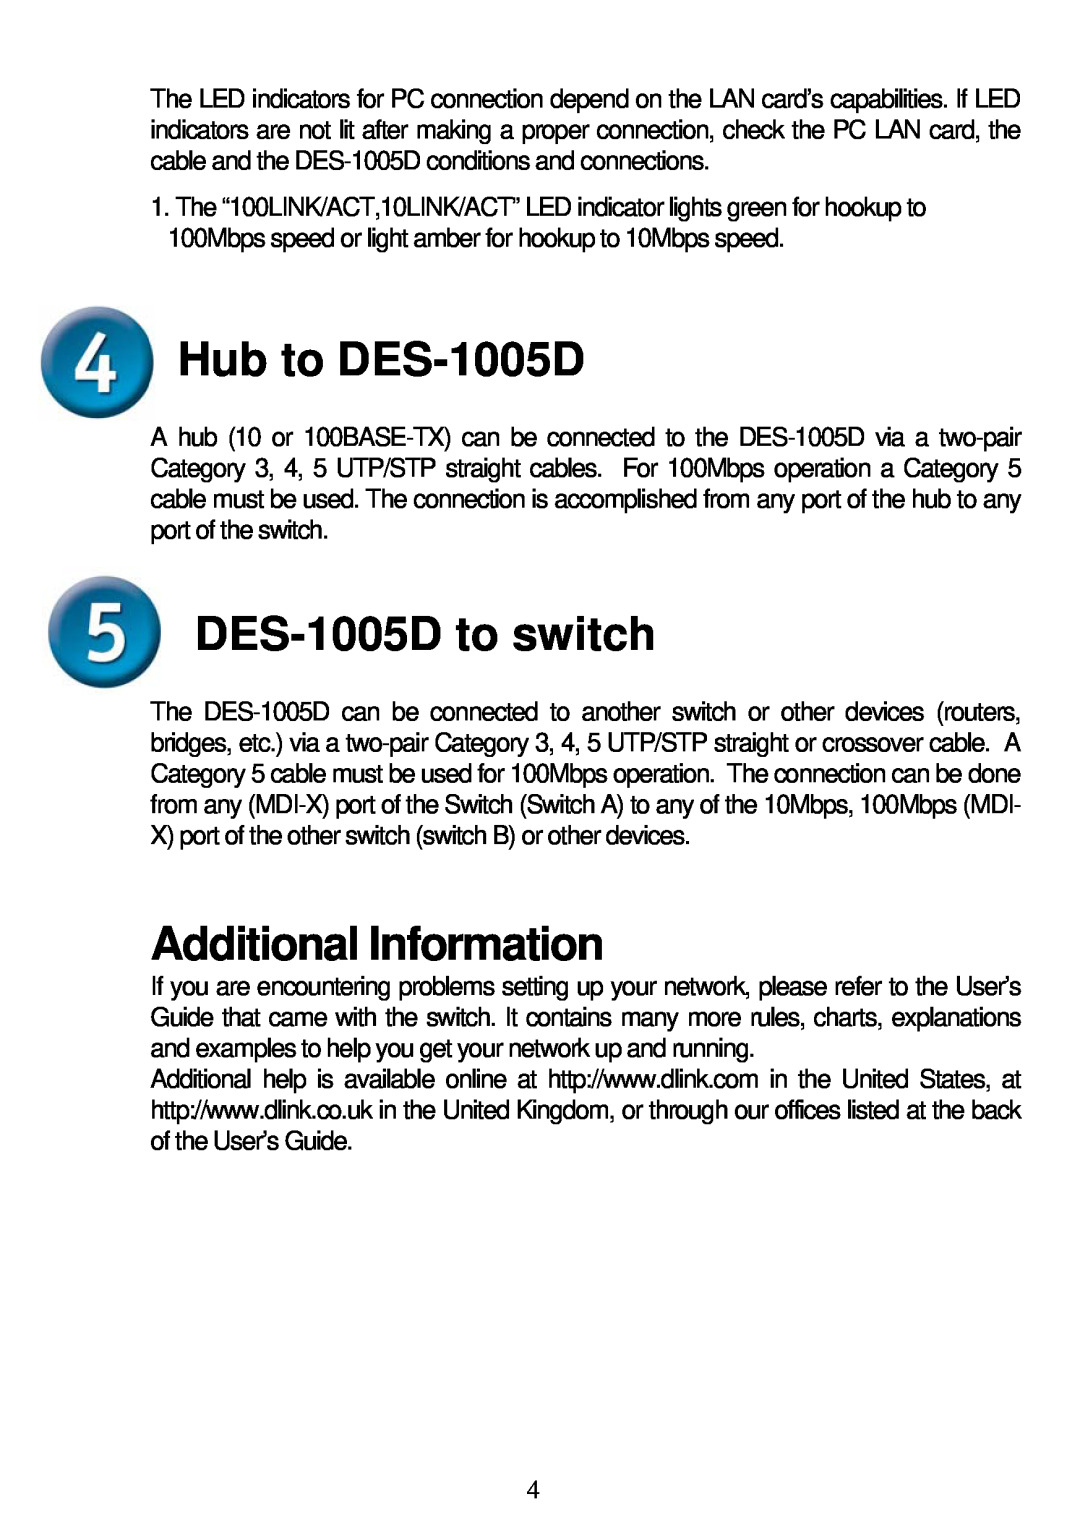 D-Link technical specifications Hub to DES-1005D, DES-1005Dto switch, Additional Information 